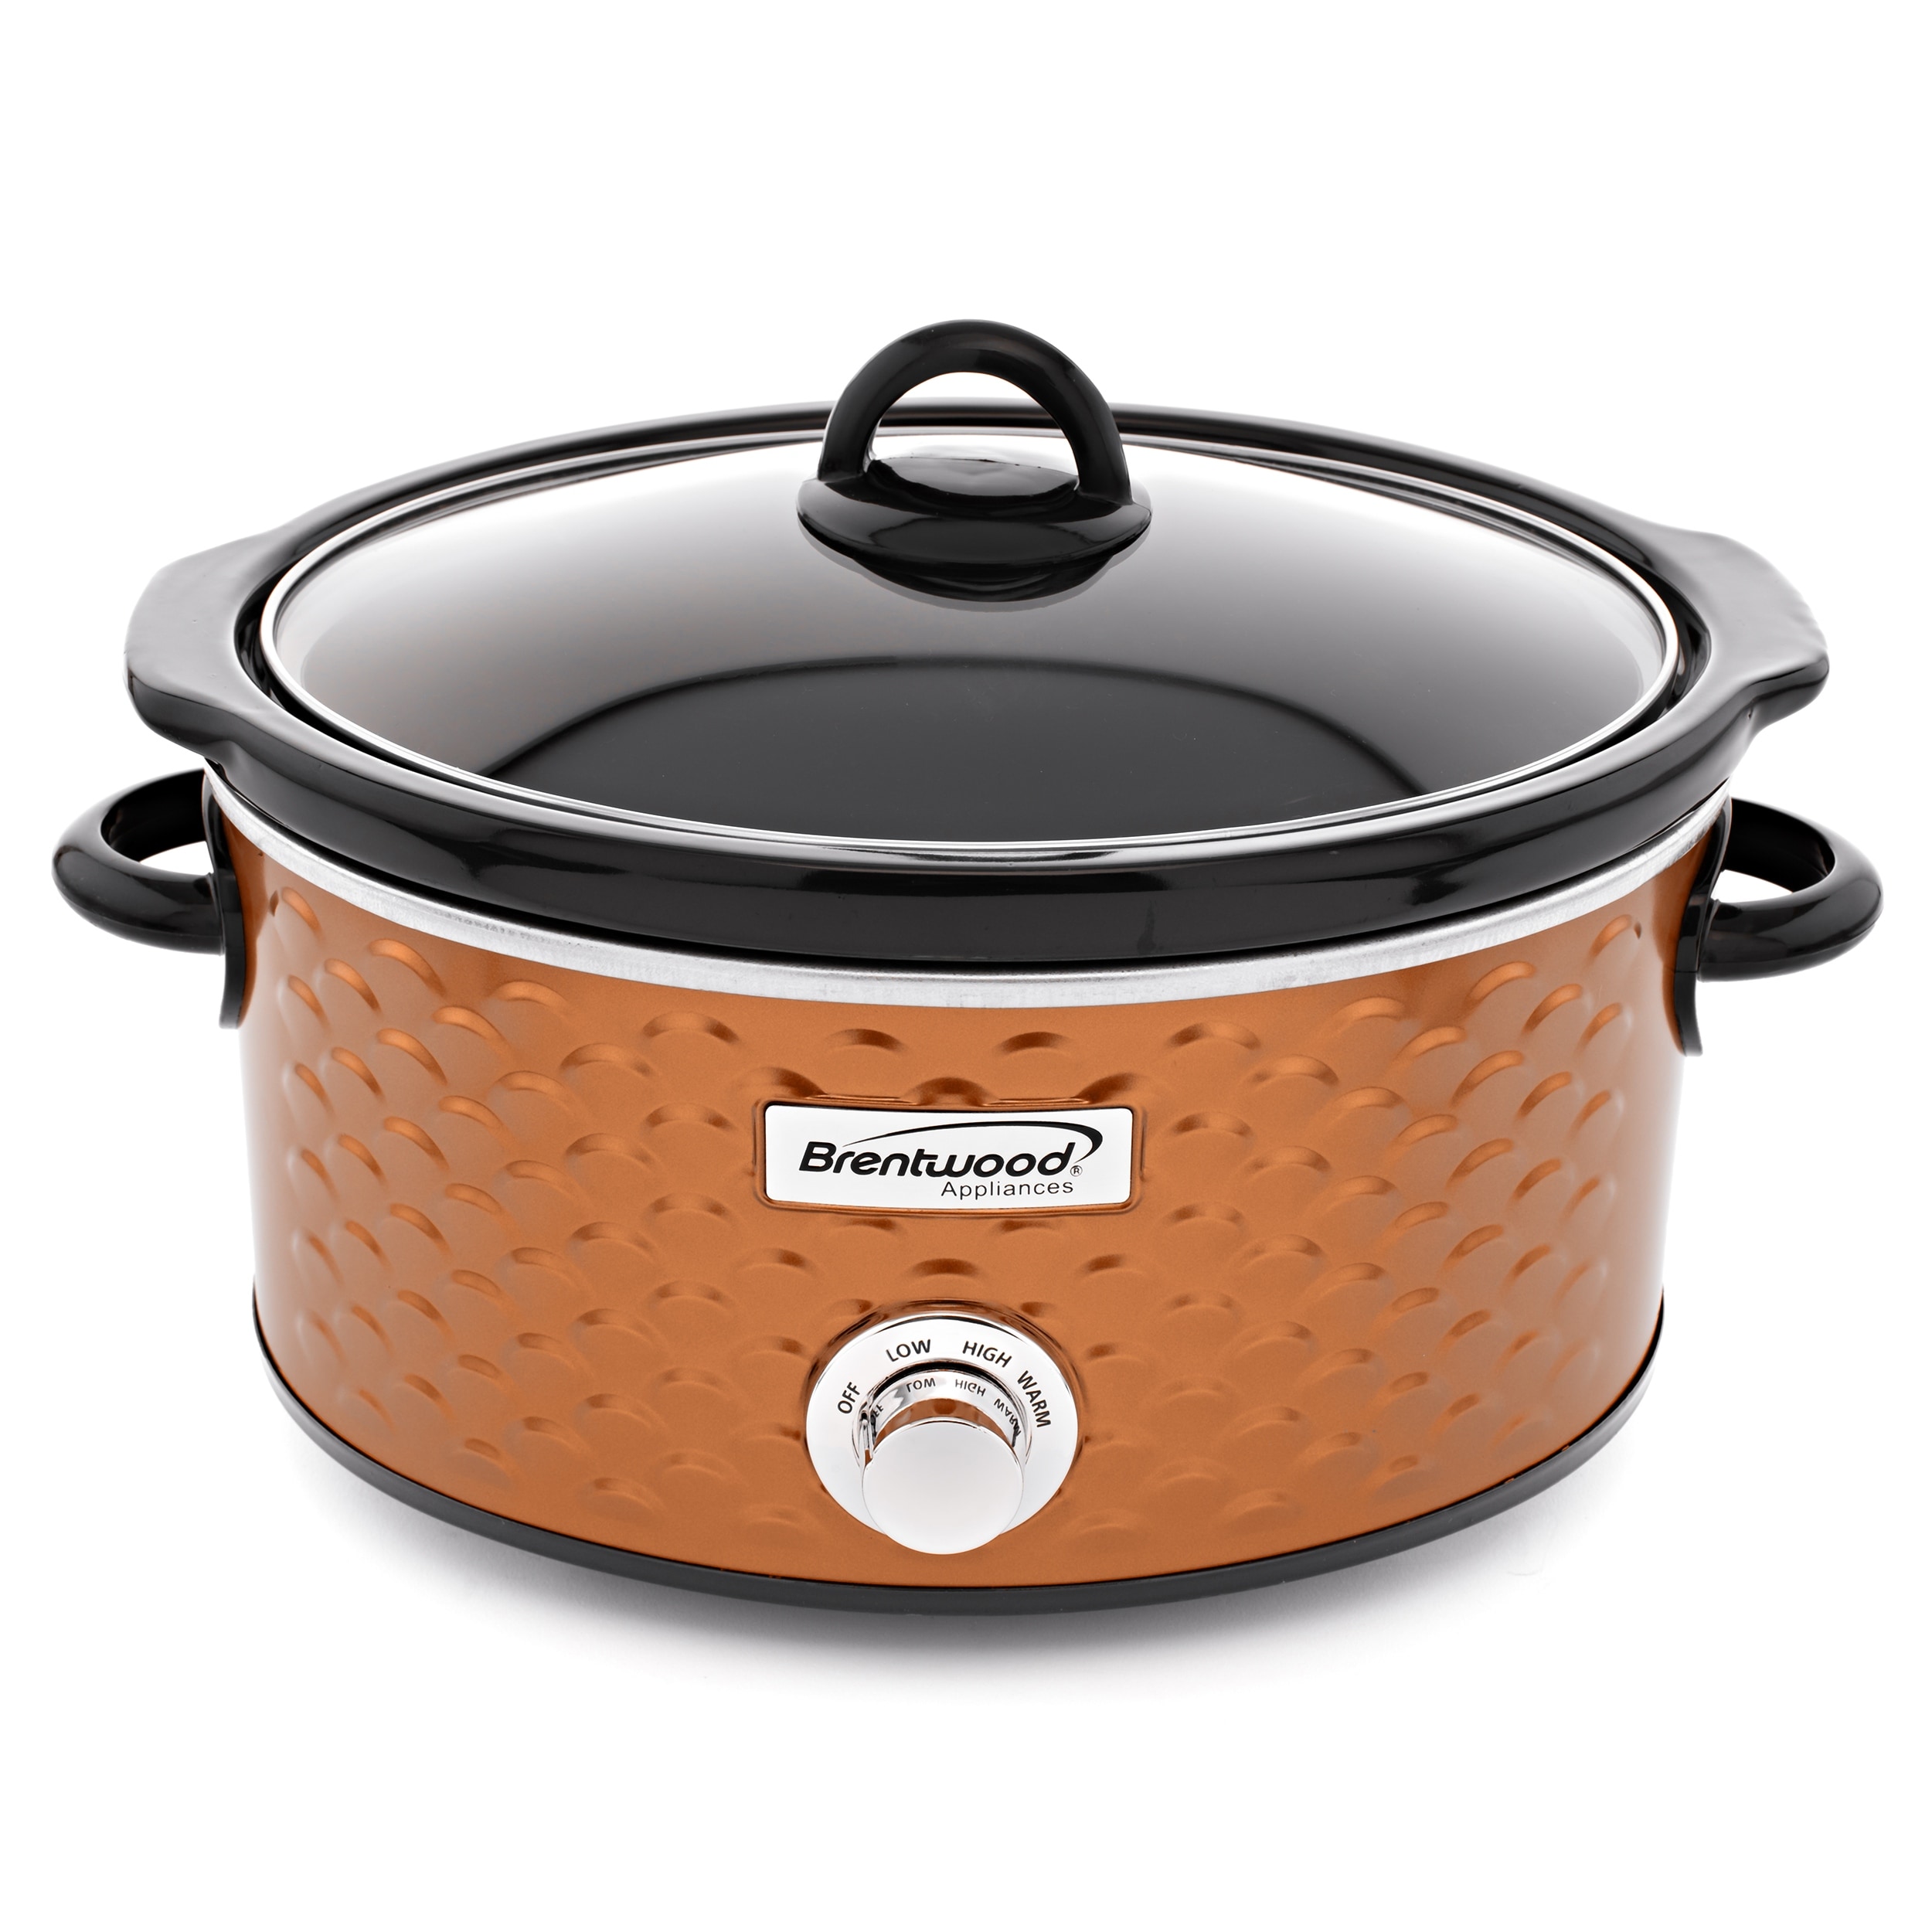 Brentwood Scallop Pattern 4.5 Quart Slow Cooker - On Sale - Bed